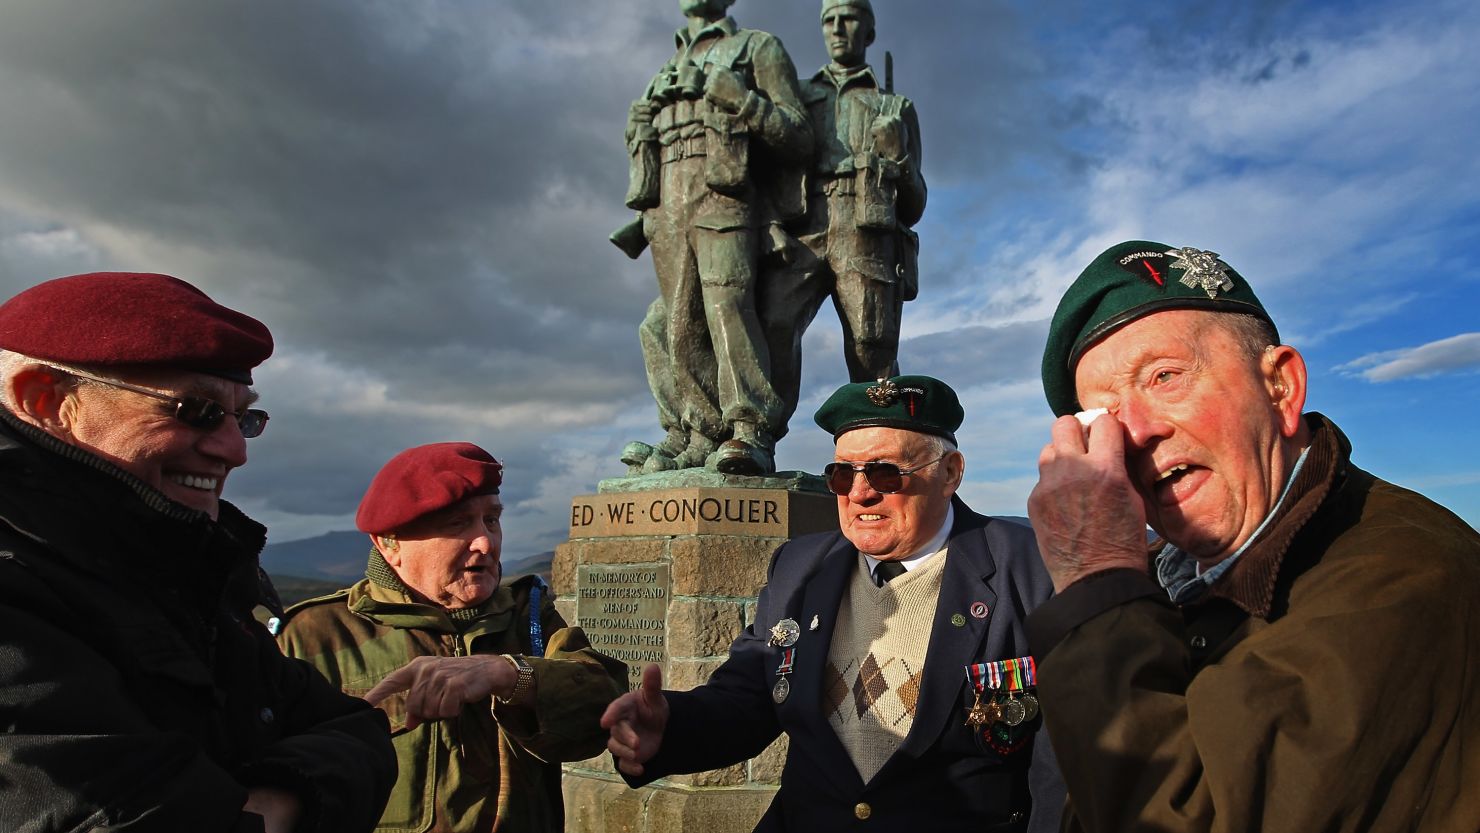 Veterans observe the two-minute silence at Spean Bridge in Scotland as a mark of respect for the war dead on November 11, 2011.